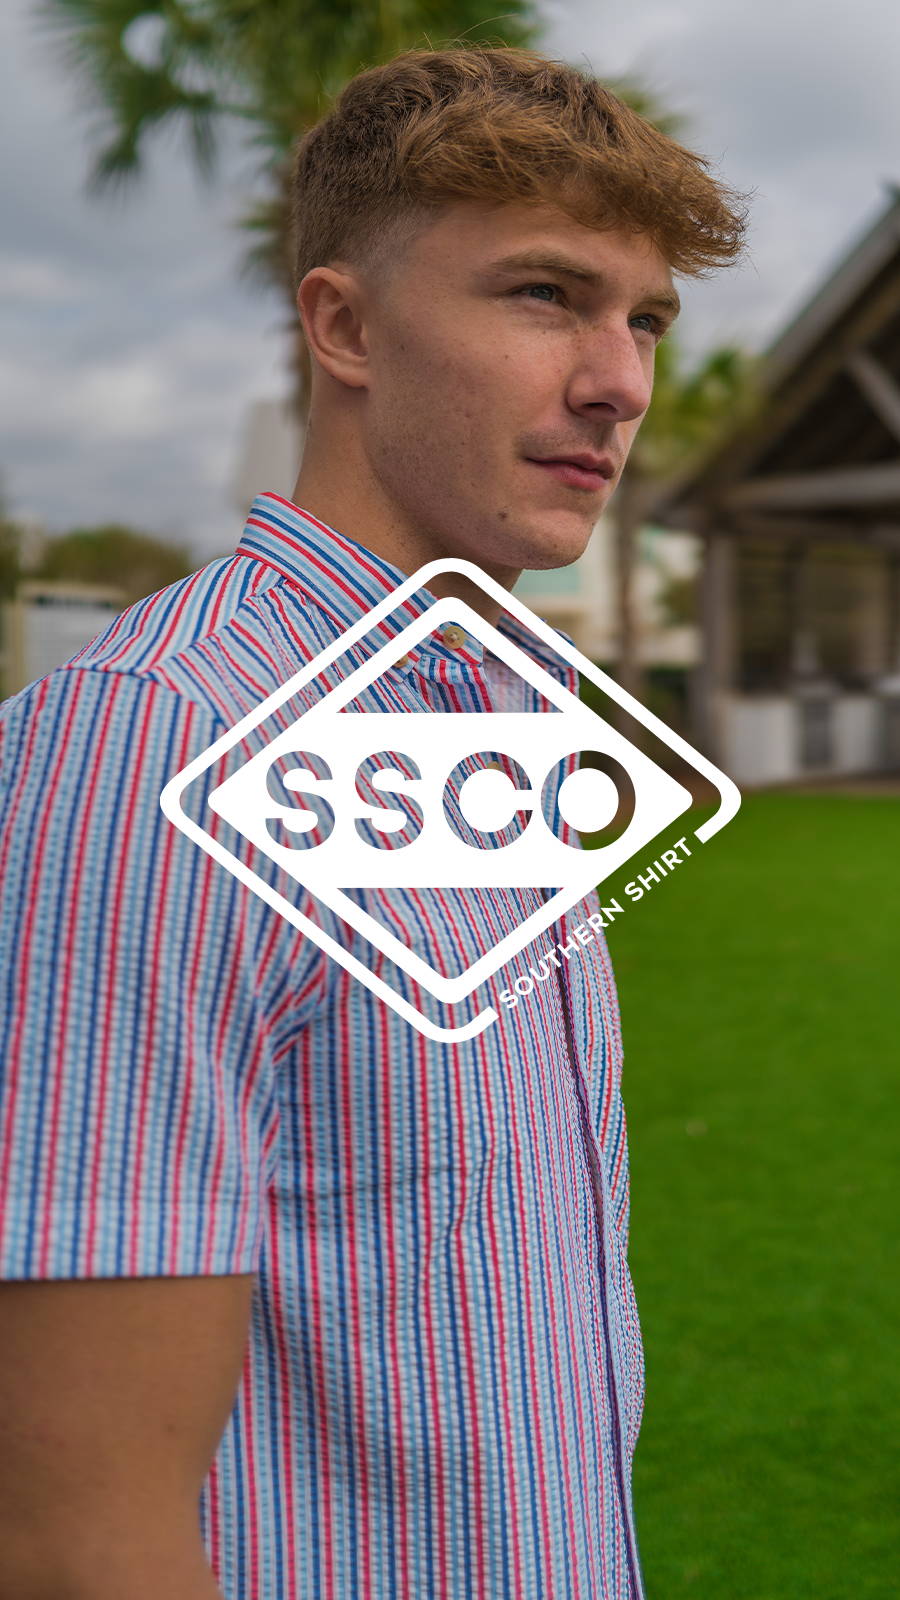 Young man wearing bright vertical striped button down shirt